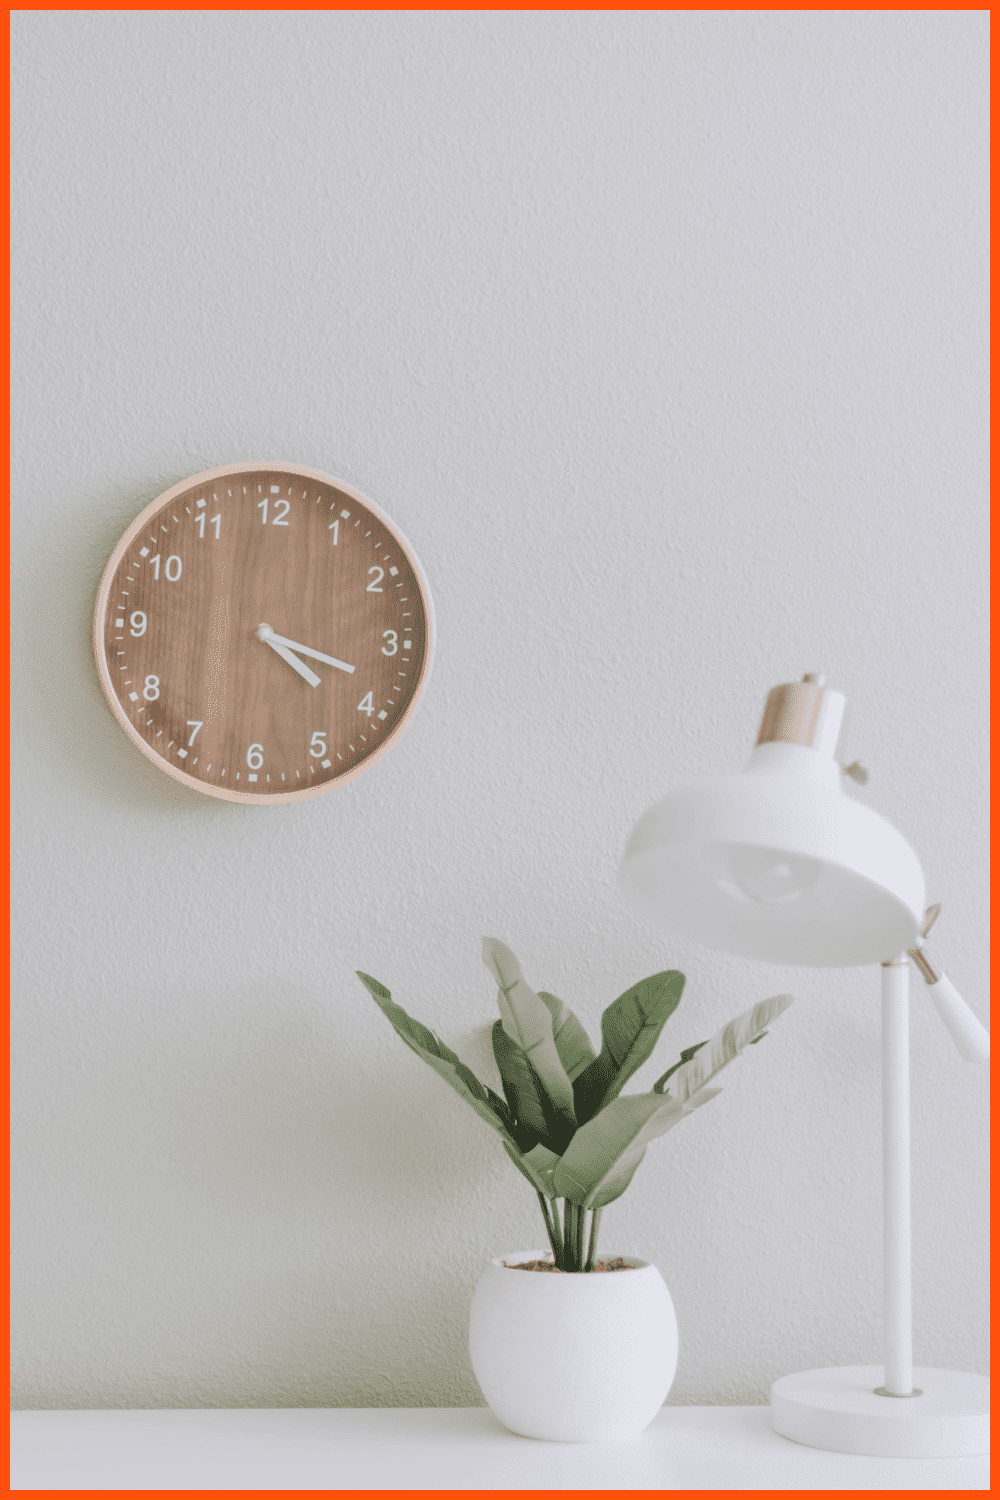 A clock on the wall, a white table lamp and a flower in a white pot on the table.